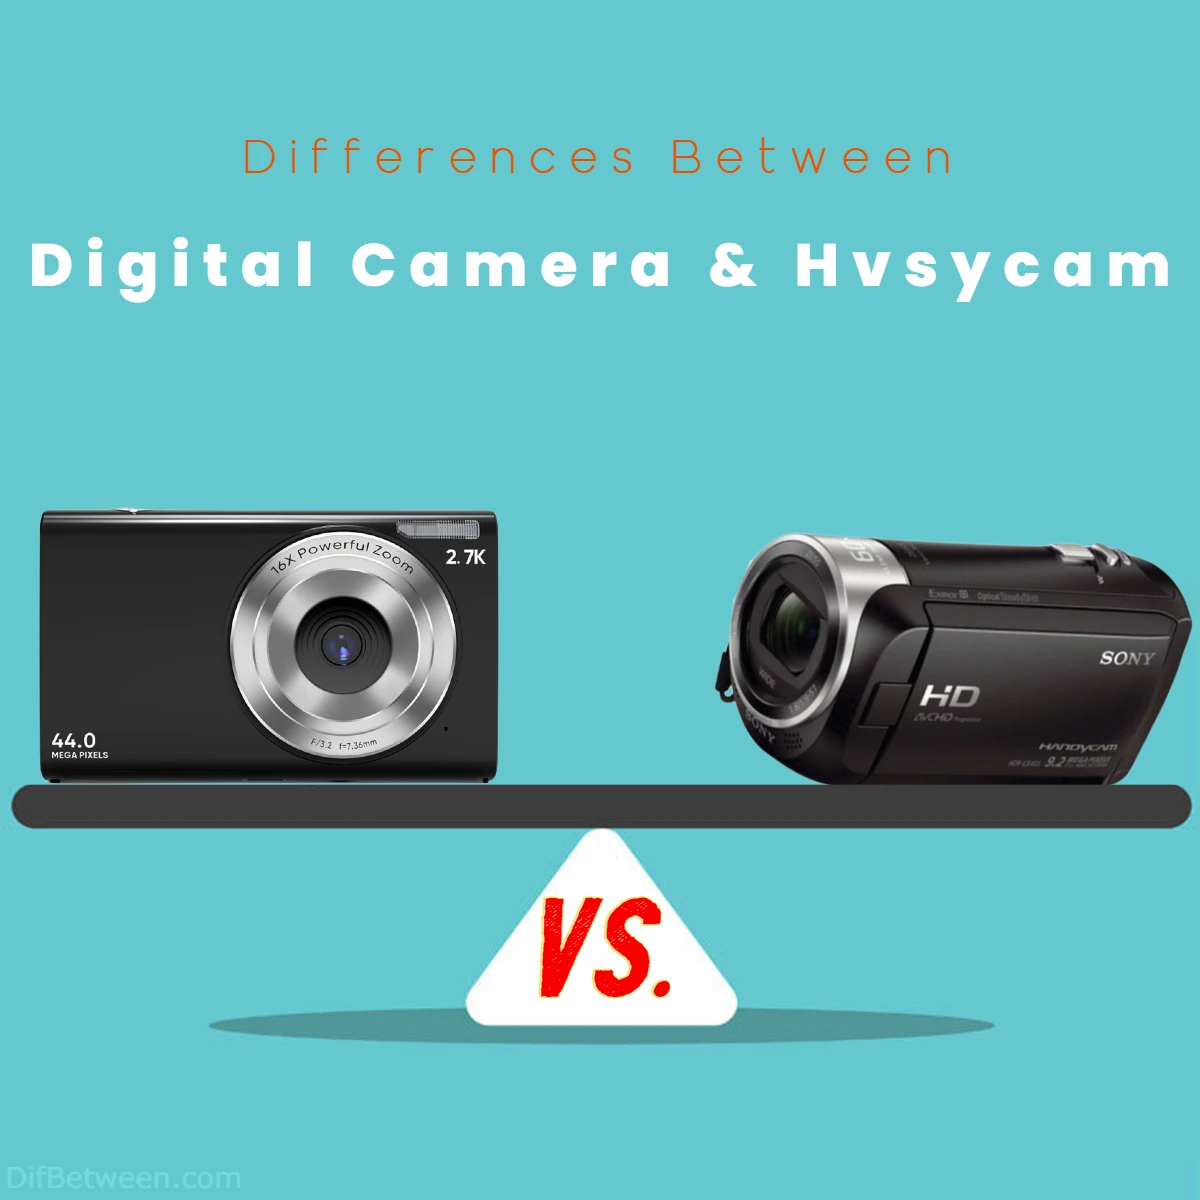 Difference Between Hvsycam and Digital Camera